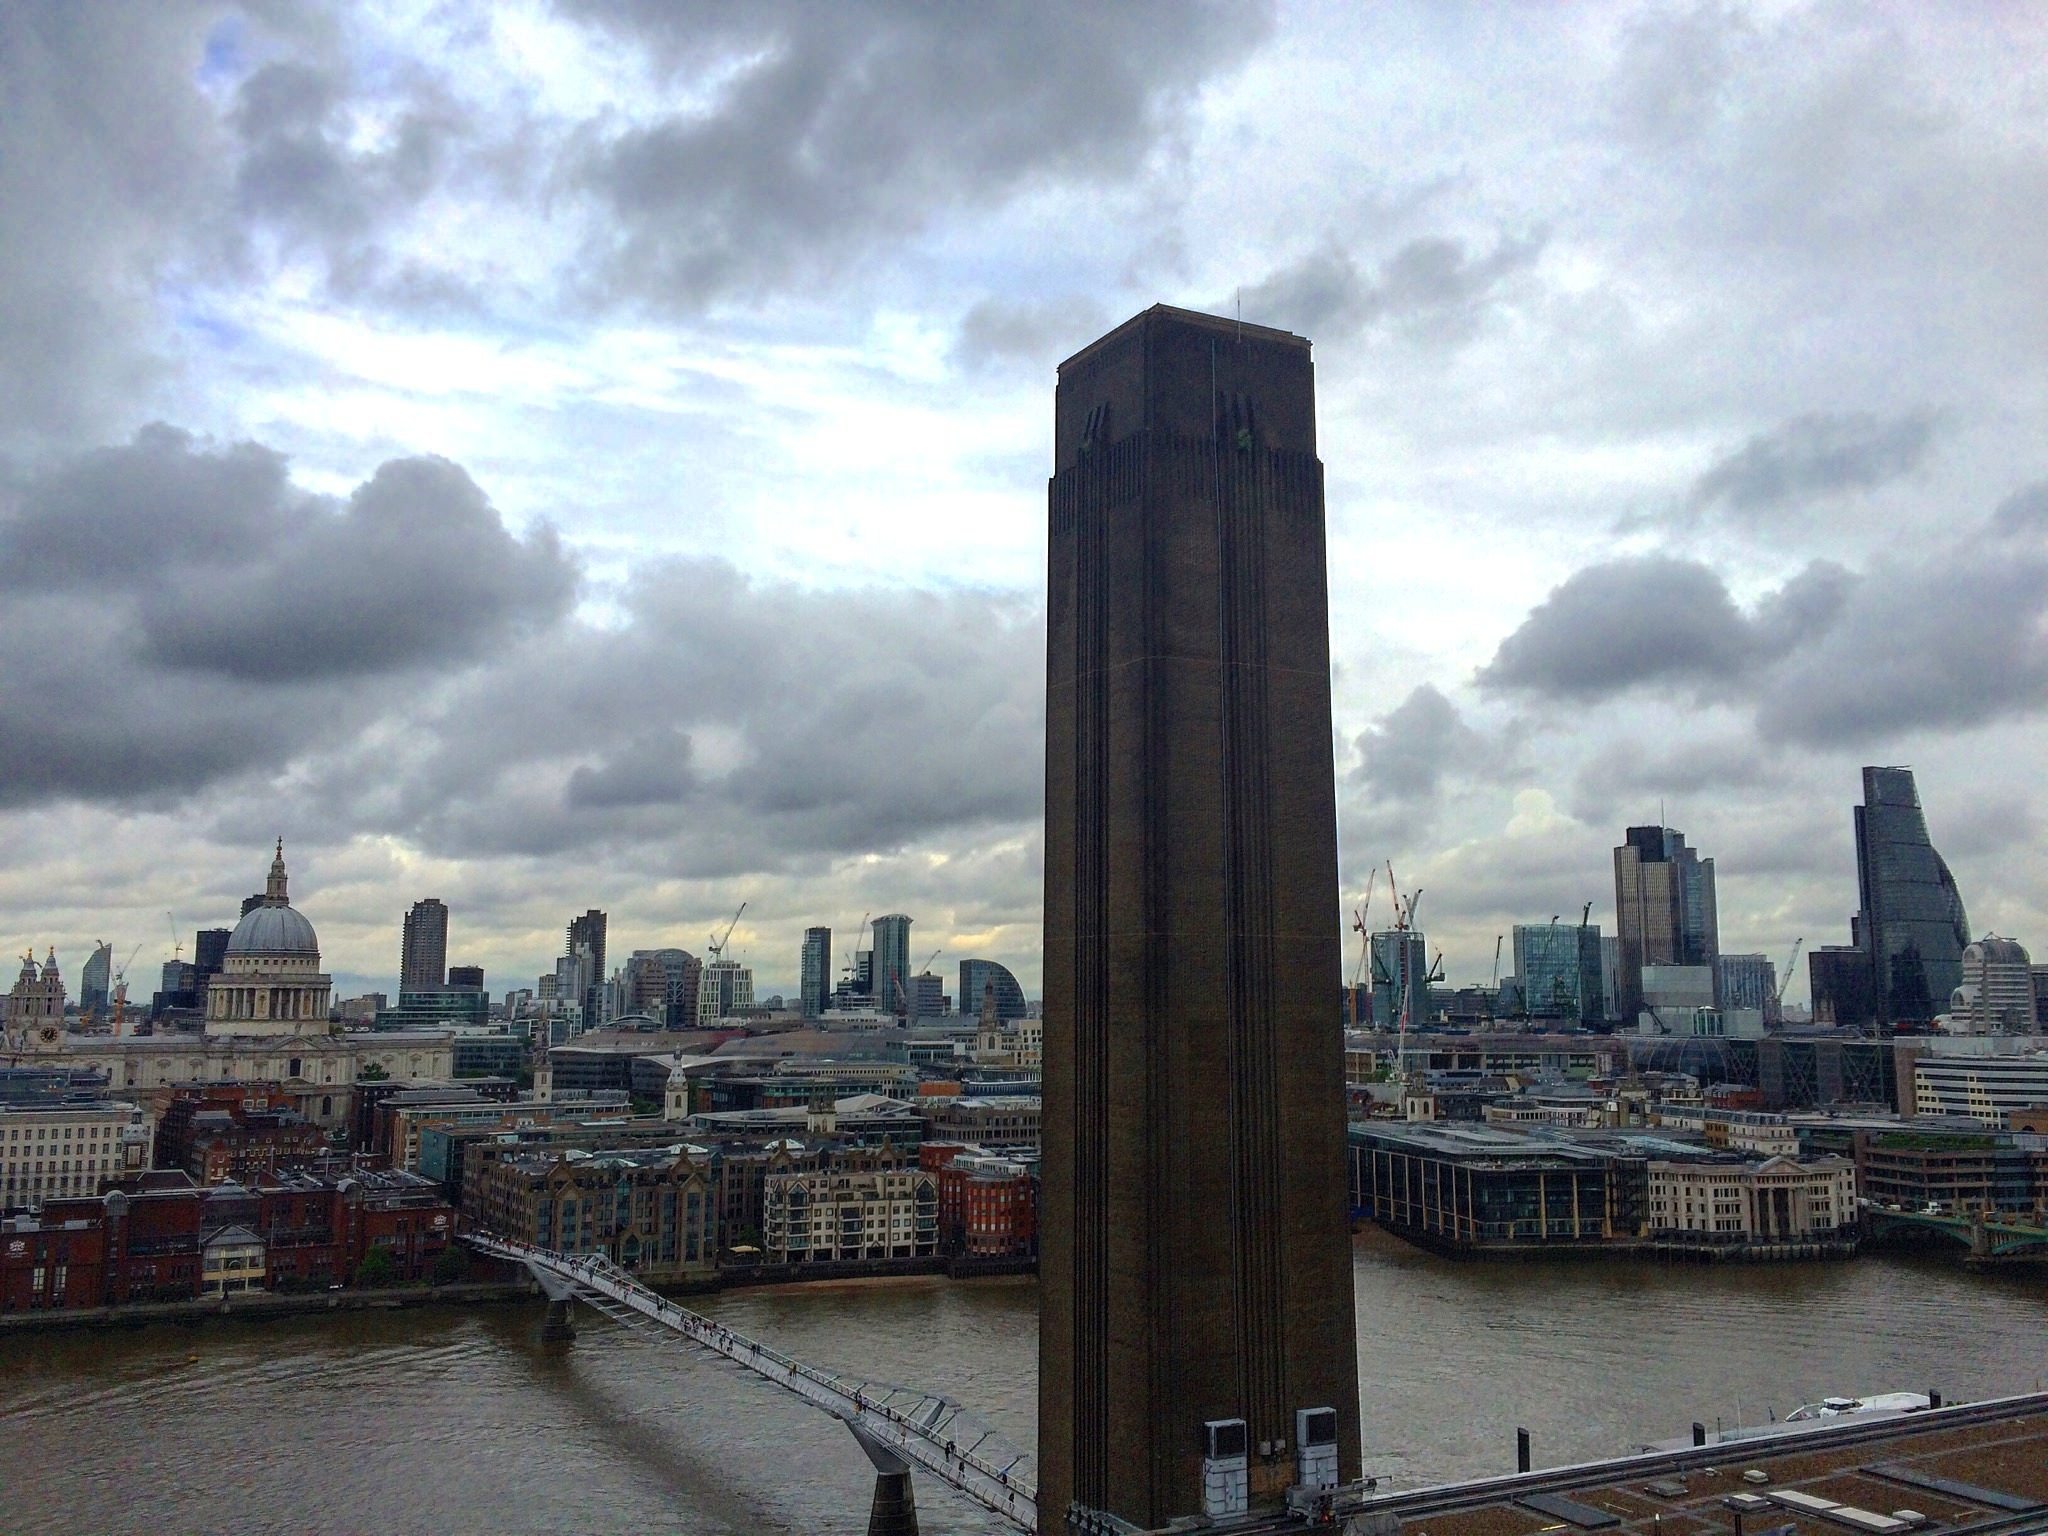 The new Tate Modern by Jacques Herzog and Pierre de Meuron